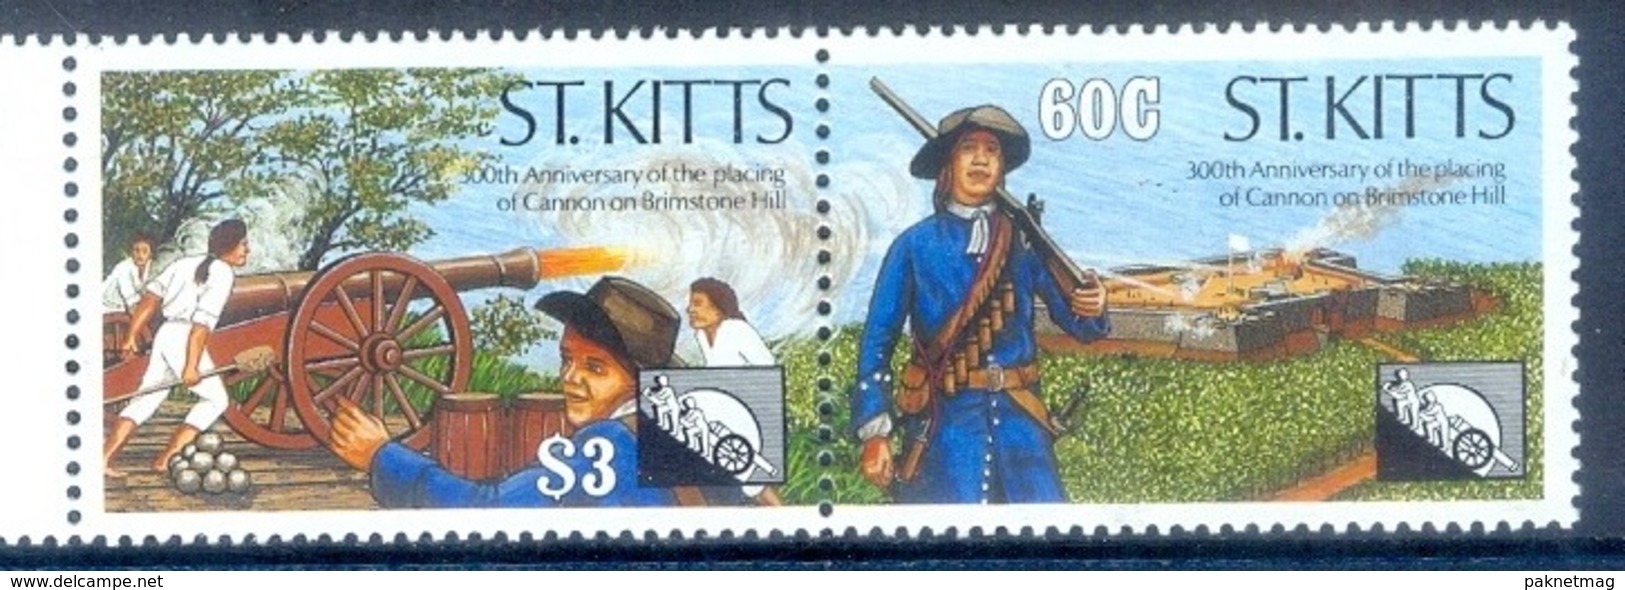 M160- St. Kitts 300th Anniversary Of Th Placing Of Cannon On Brimstone Hill. - St.Kitts And Nevis ( 1983-...)